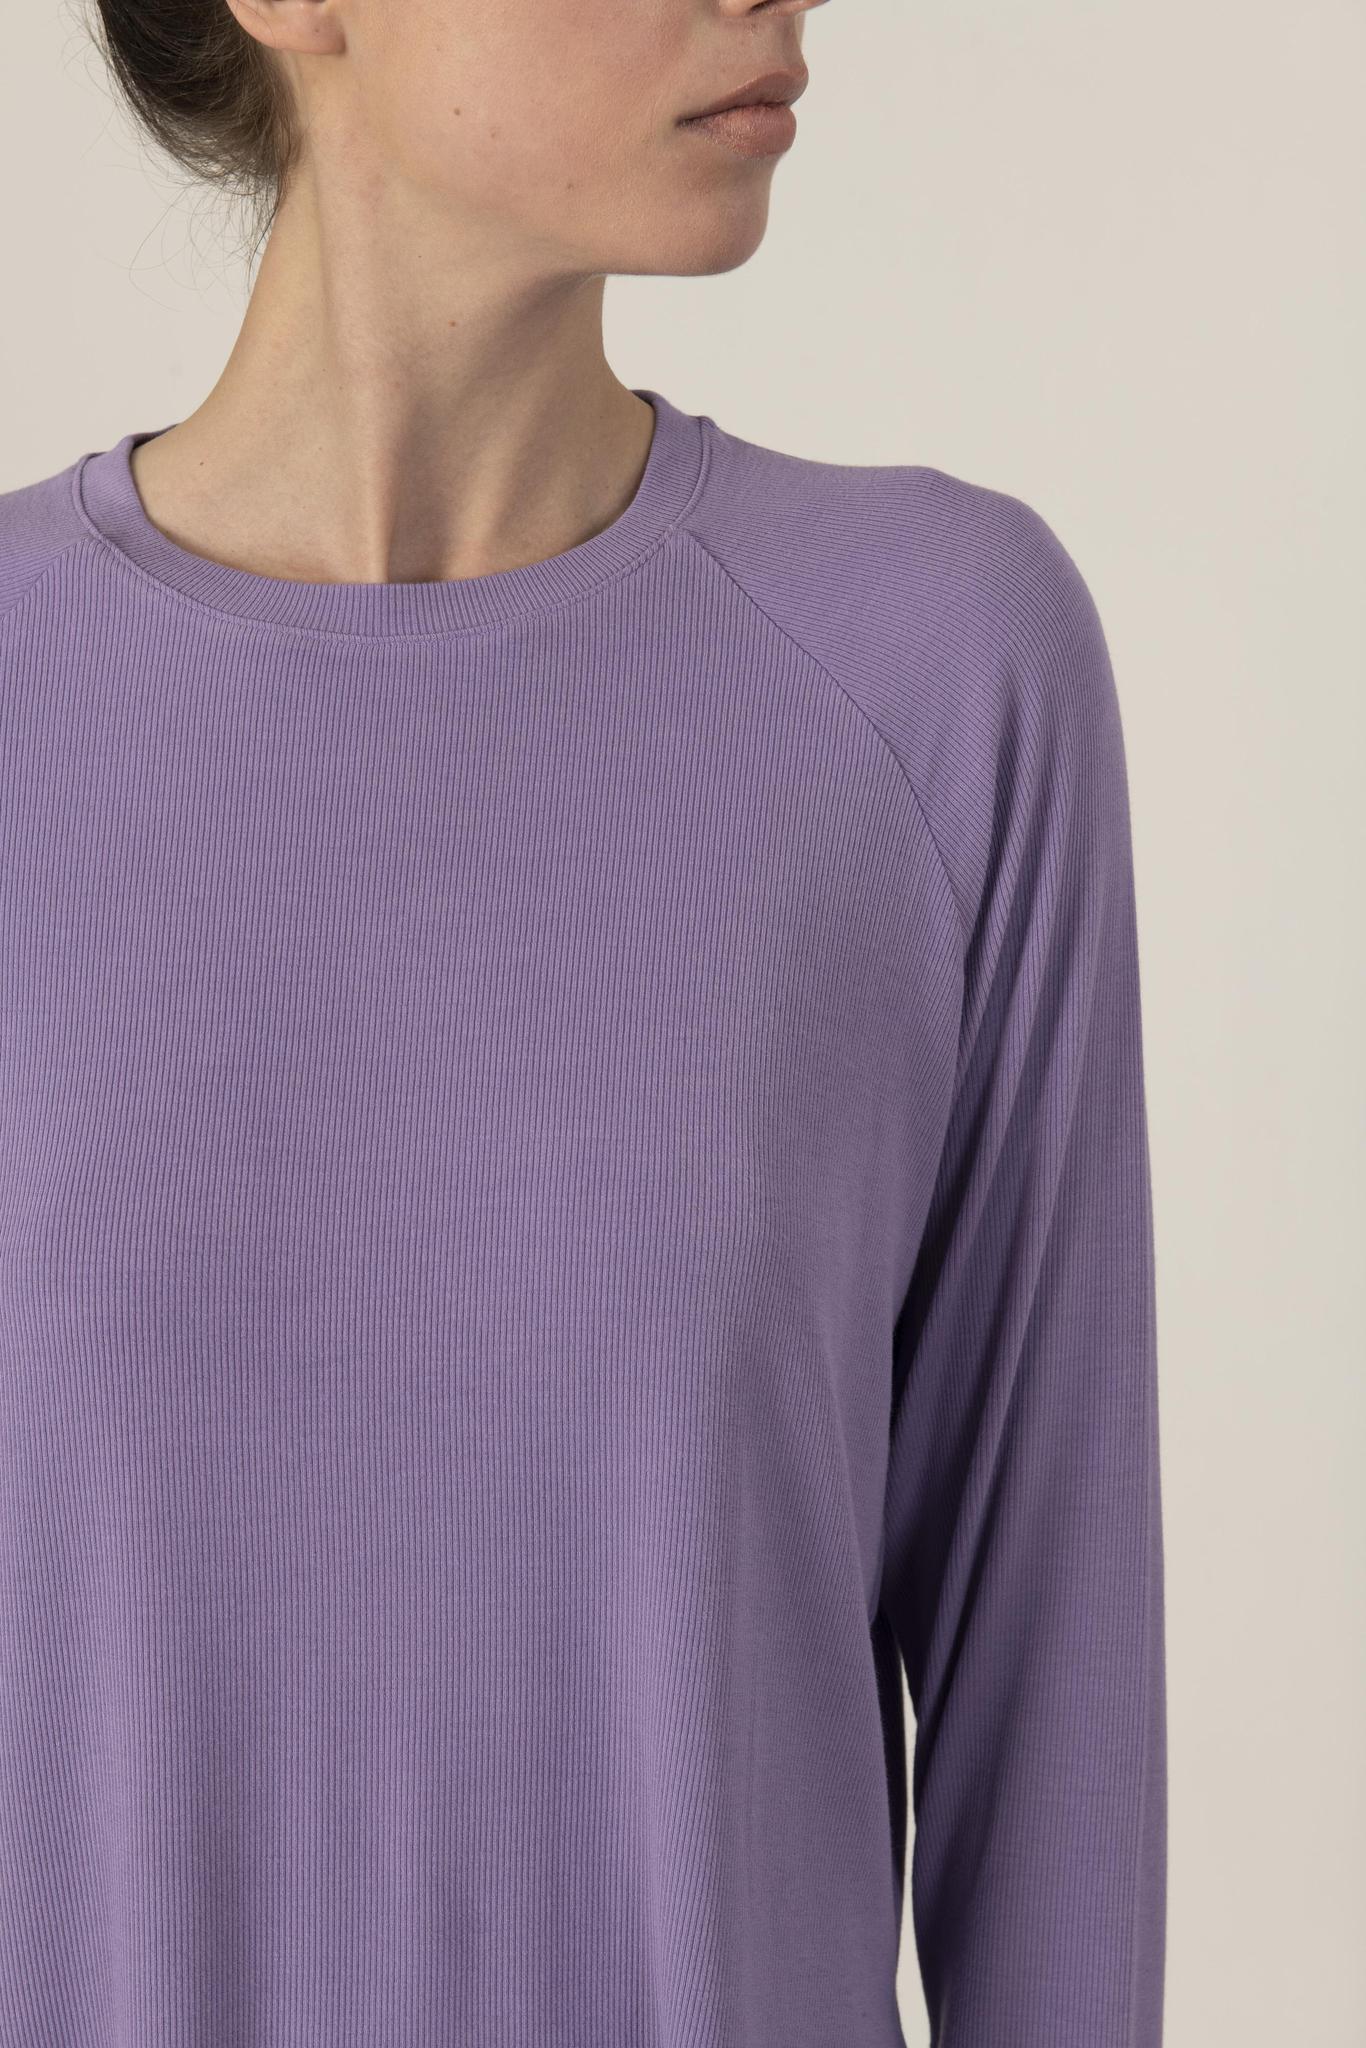 Ribbed long sleeve top in violaceous